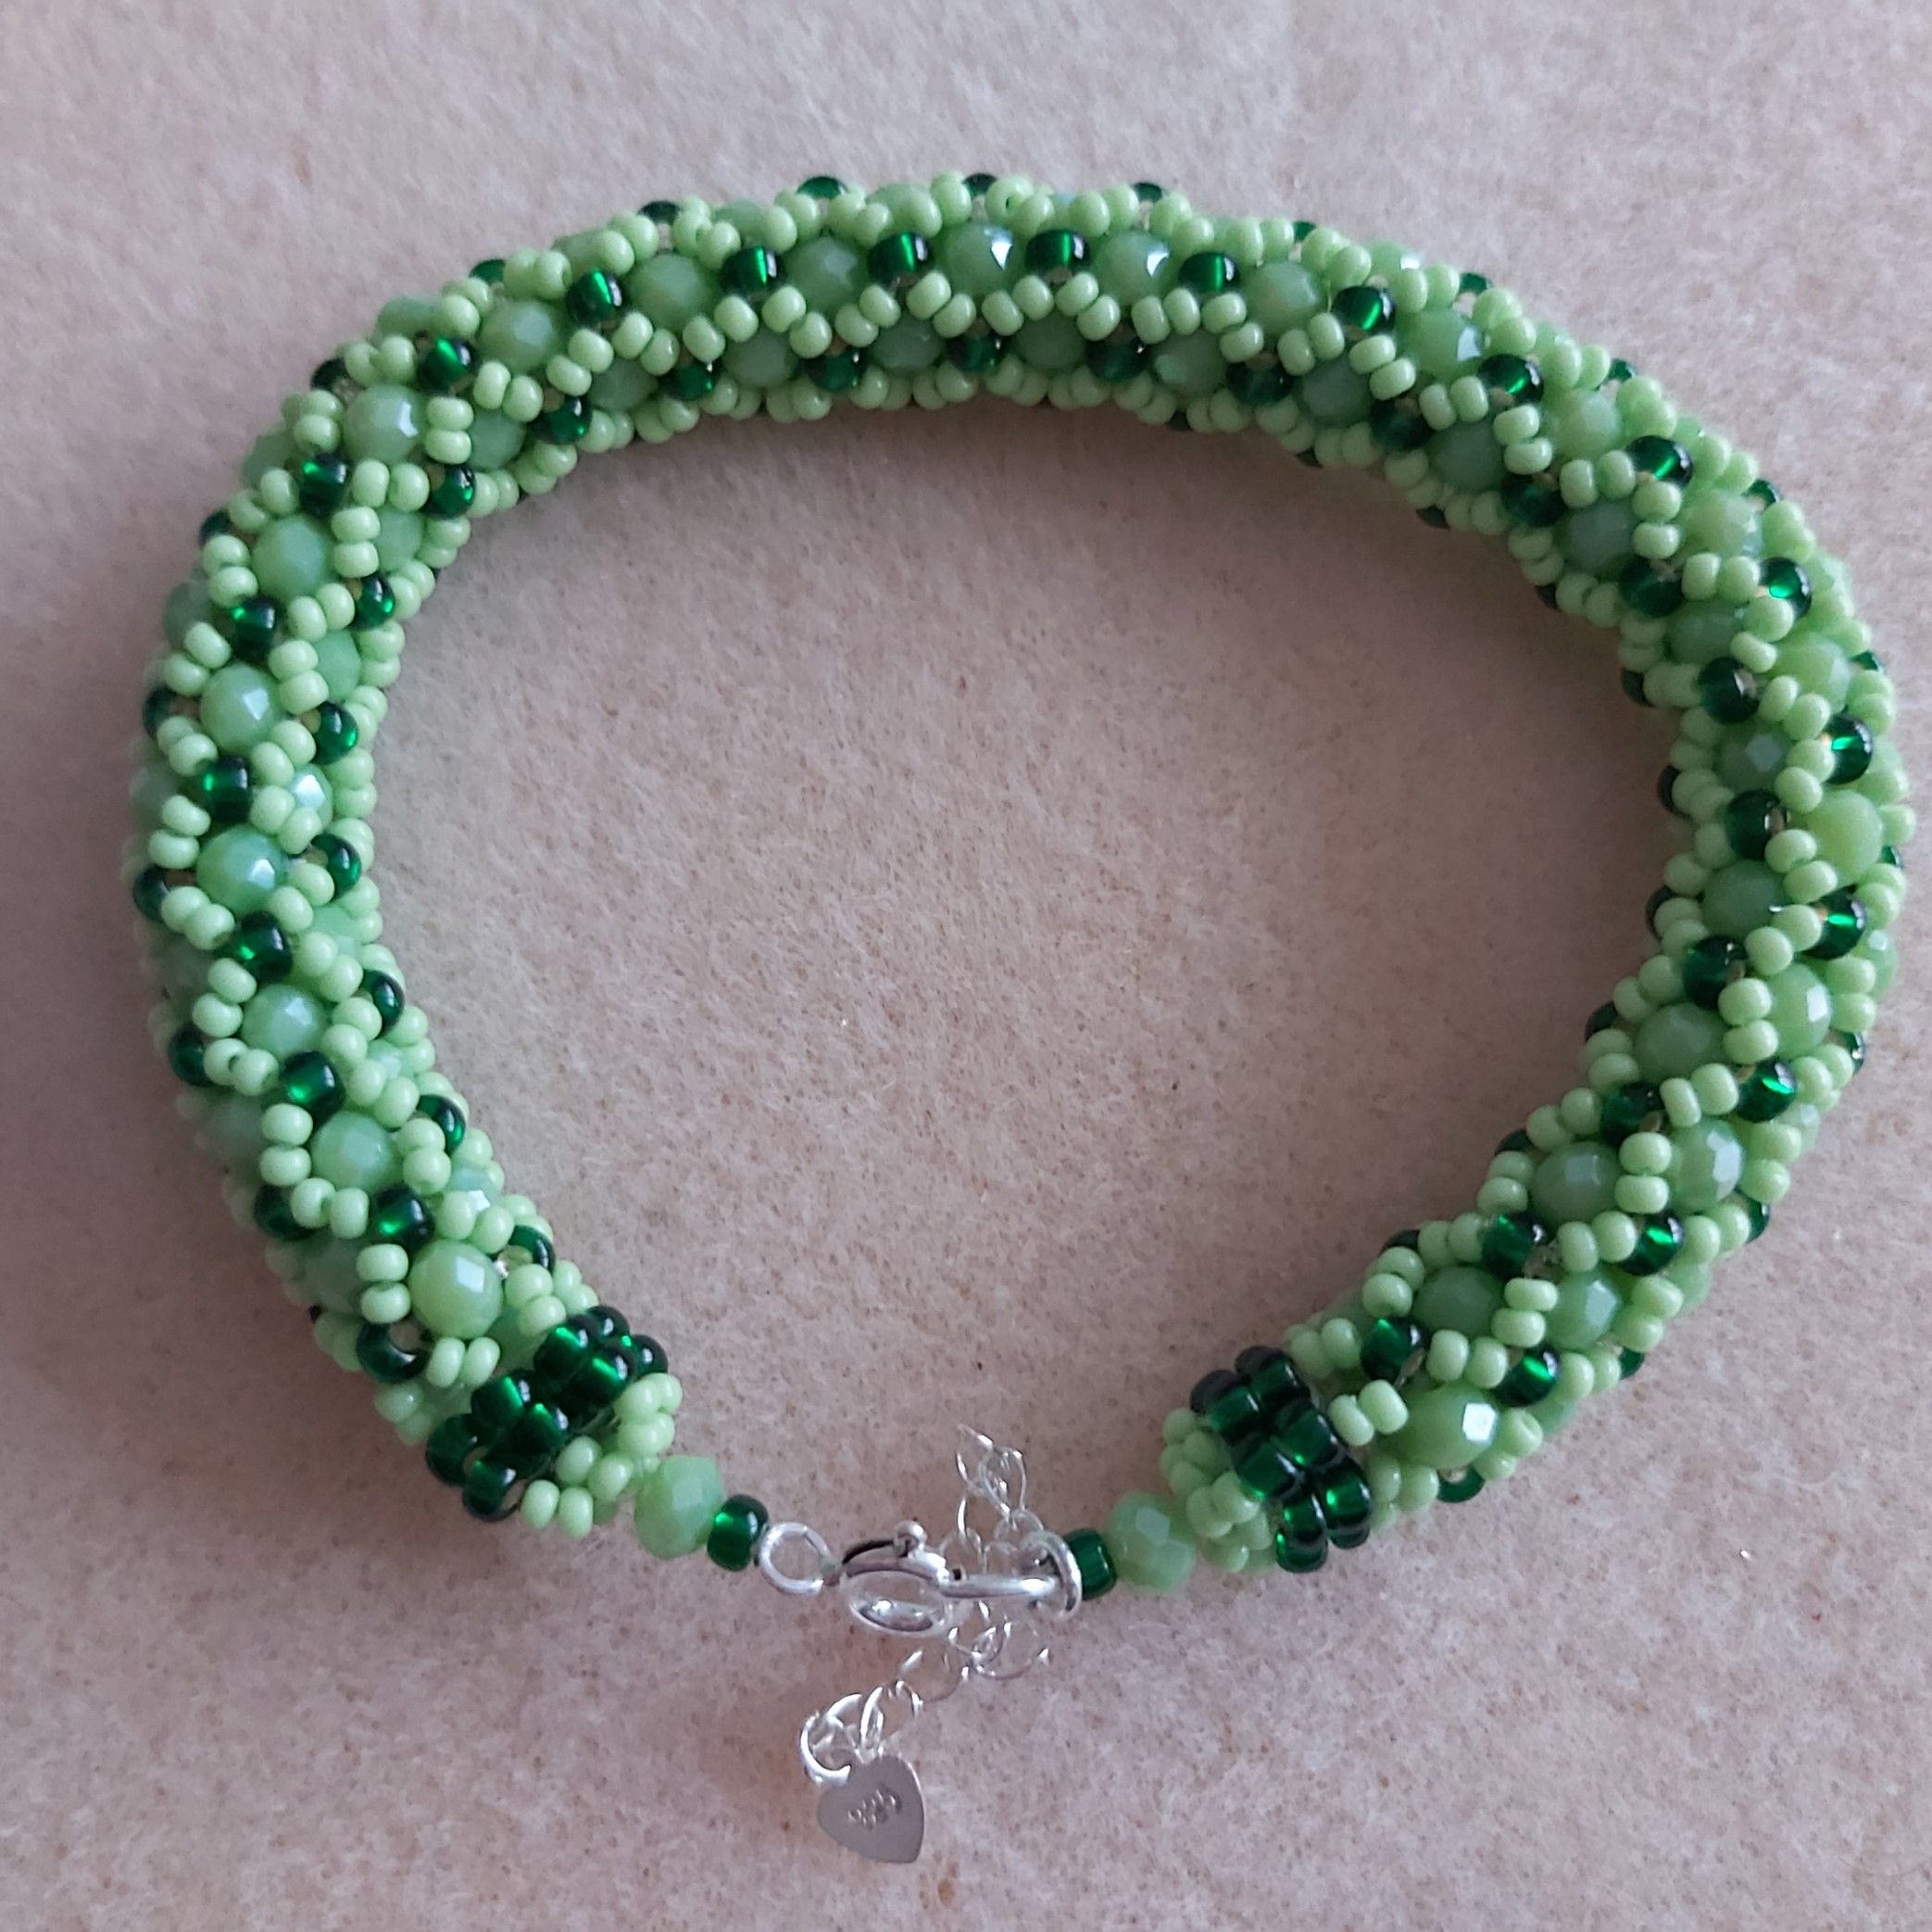 Light Green 4mm Faceted Rondelles, Miyuki Green seed beads with 925 Silver Fixings. 7.5" - 8.5"